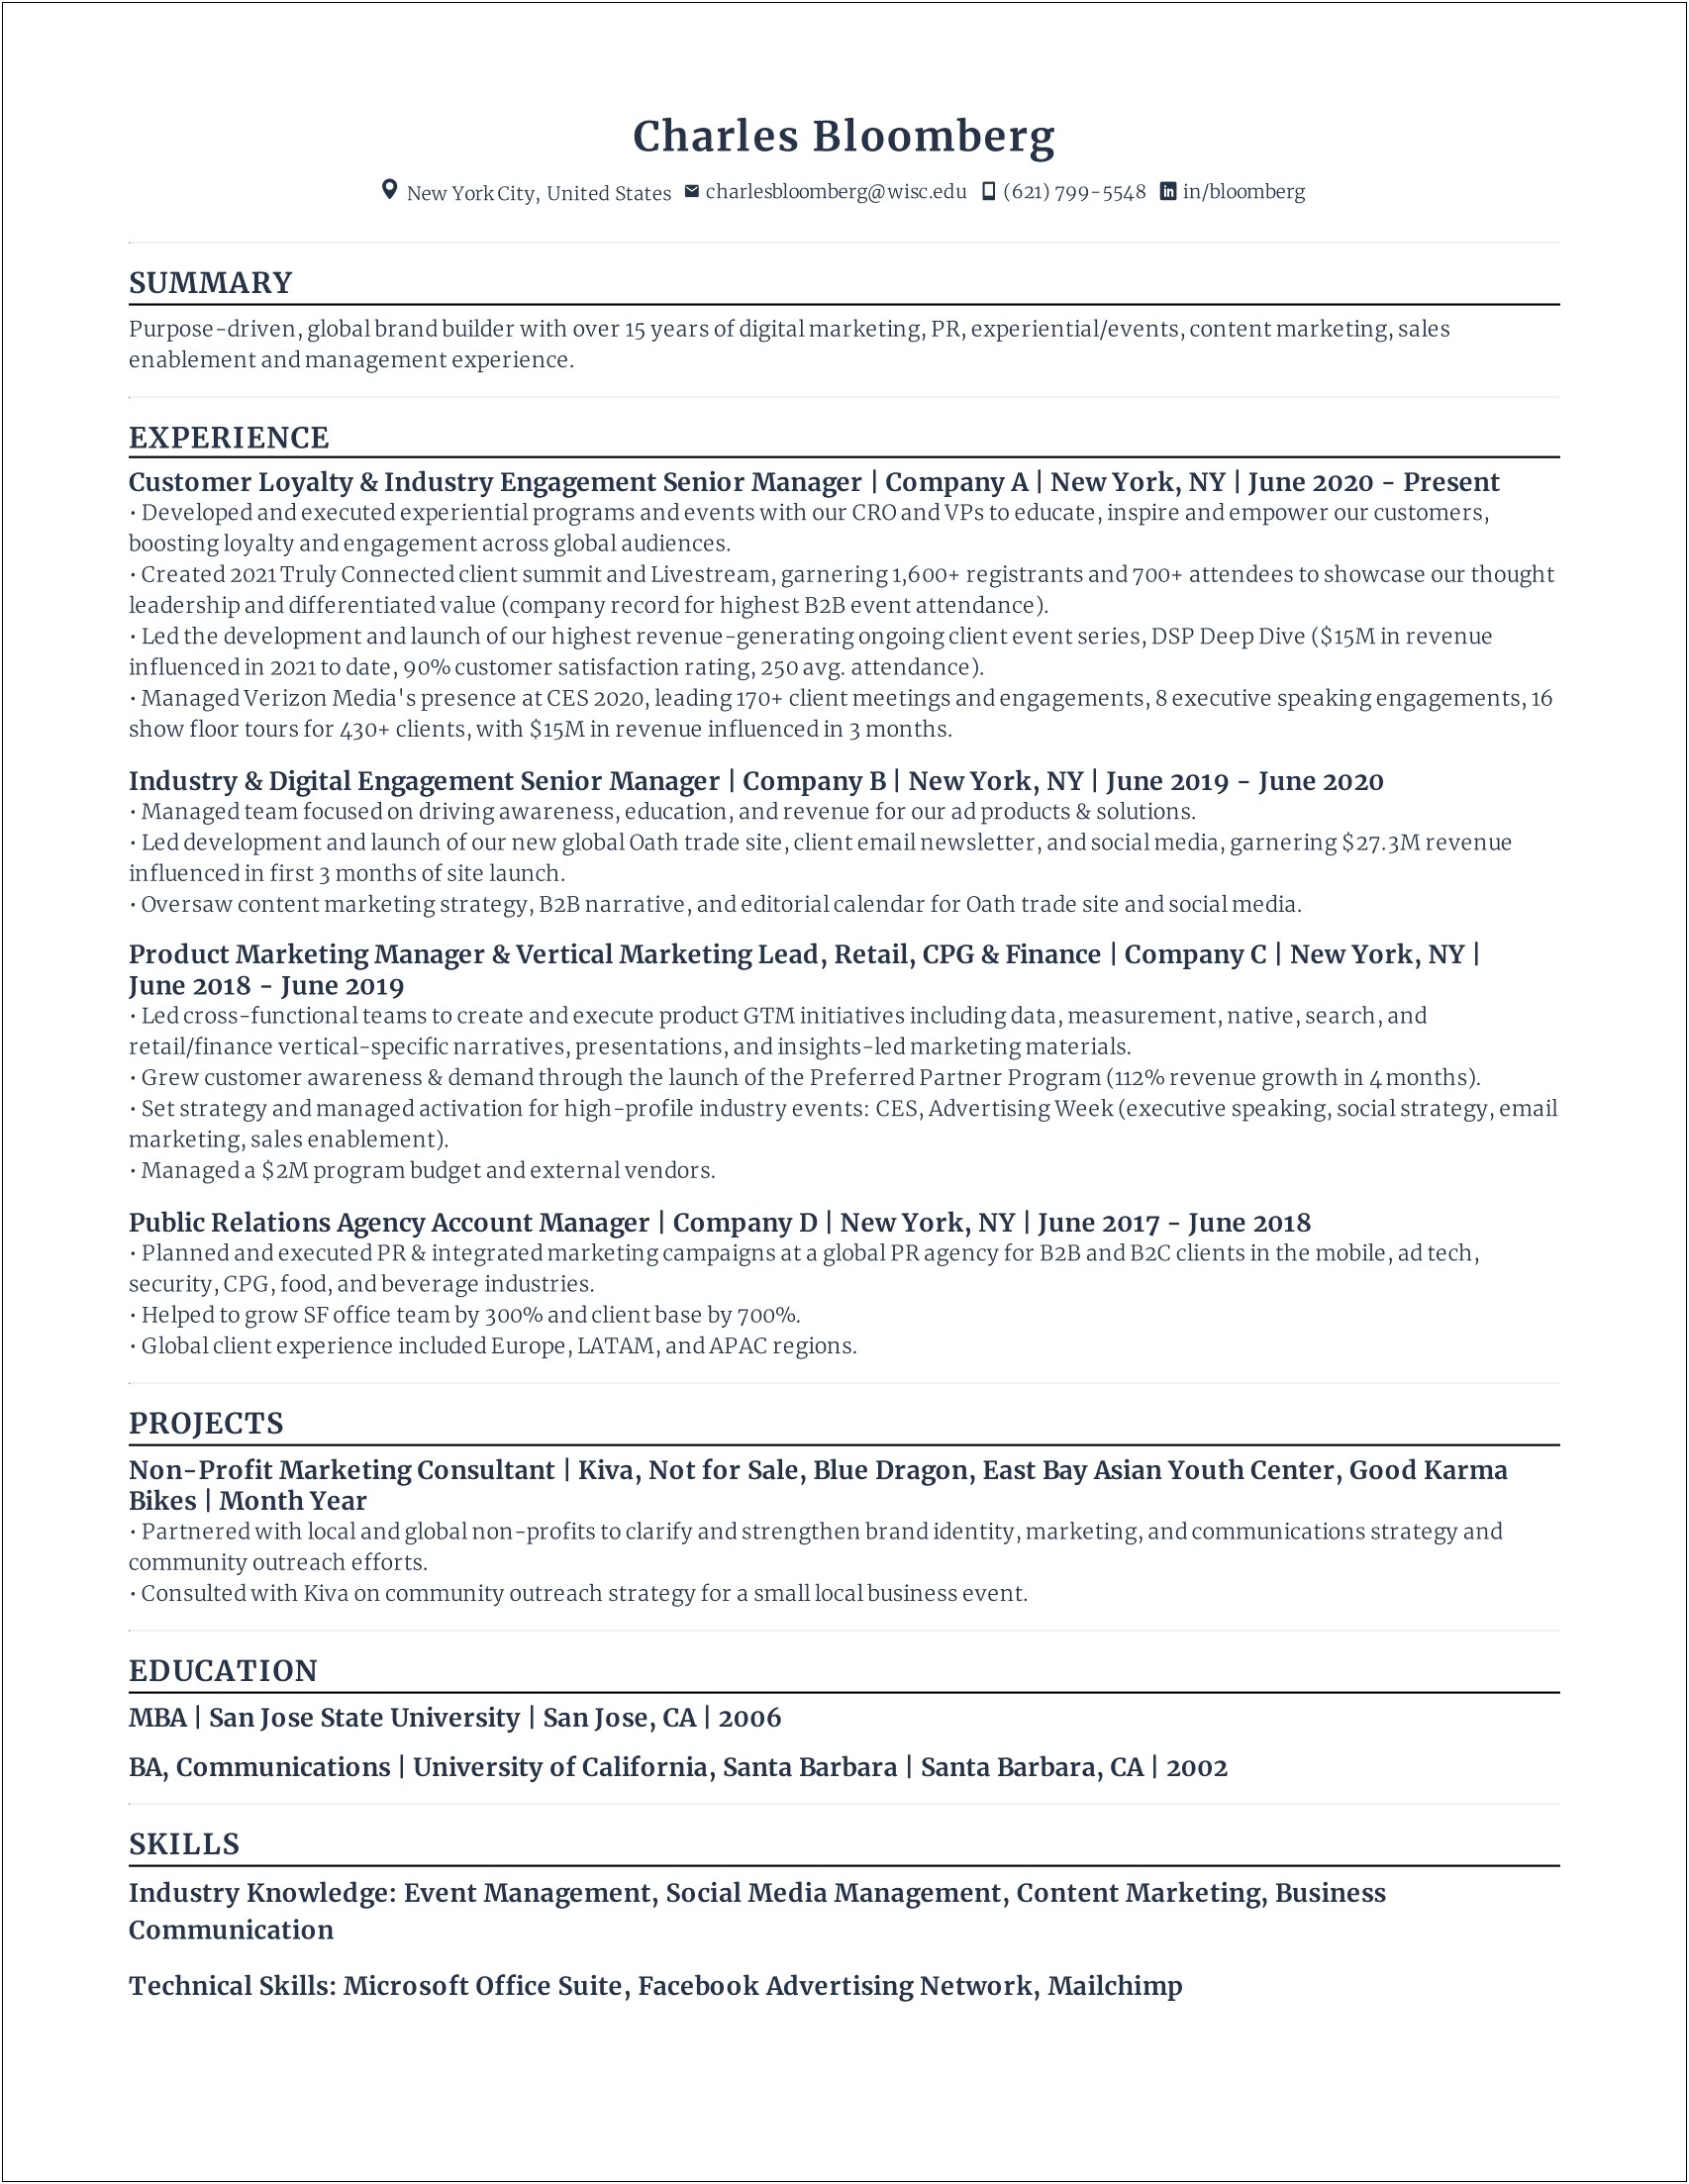 Social Media Event Experience On A Resume